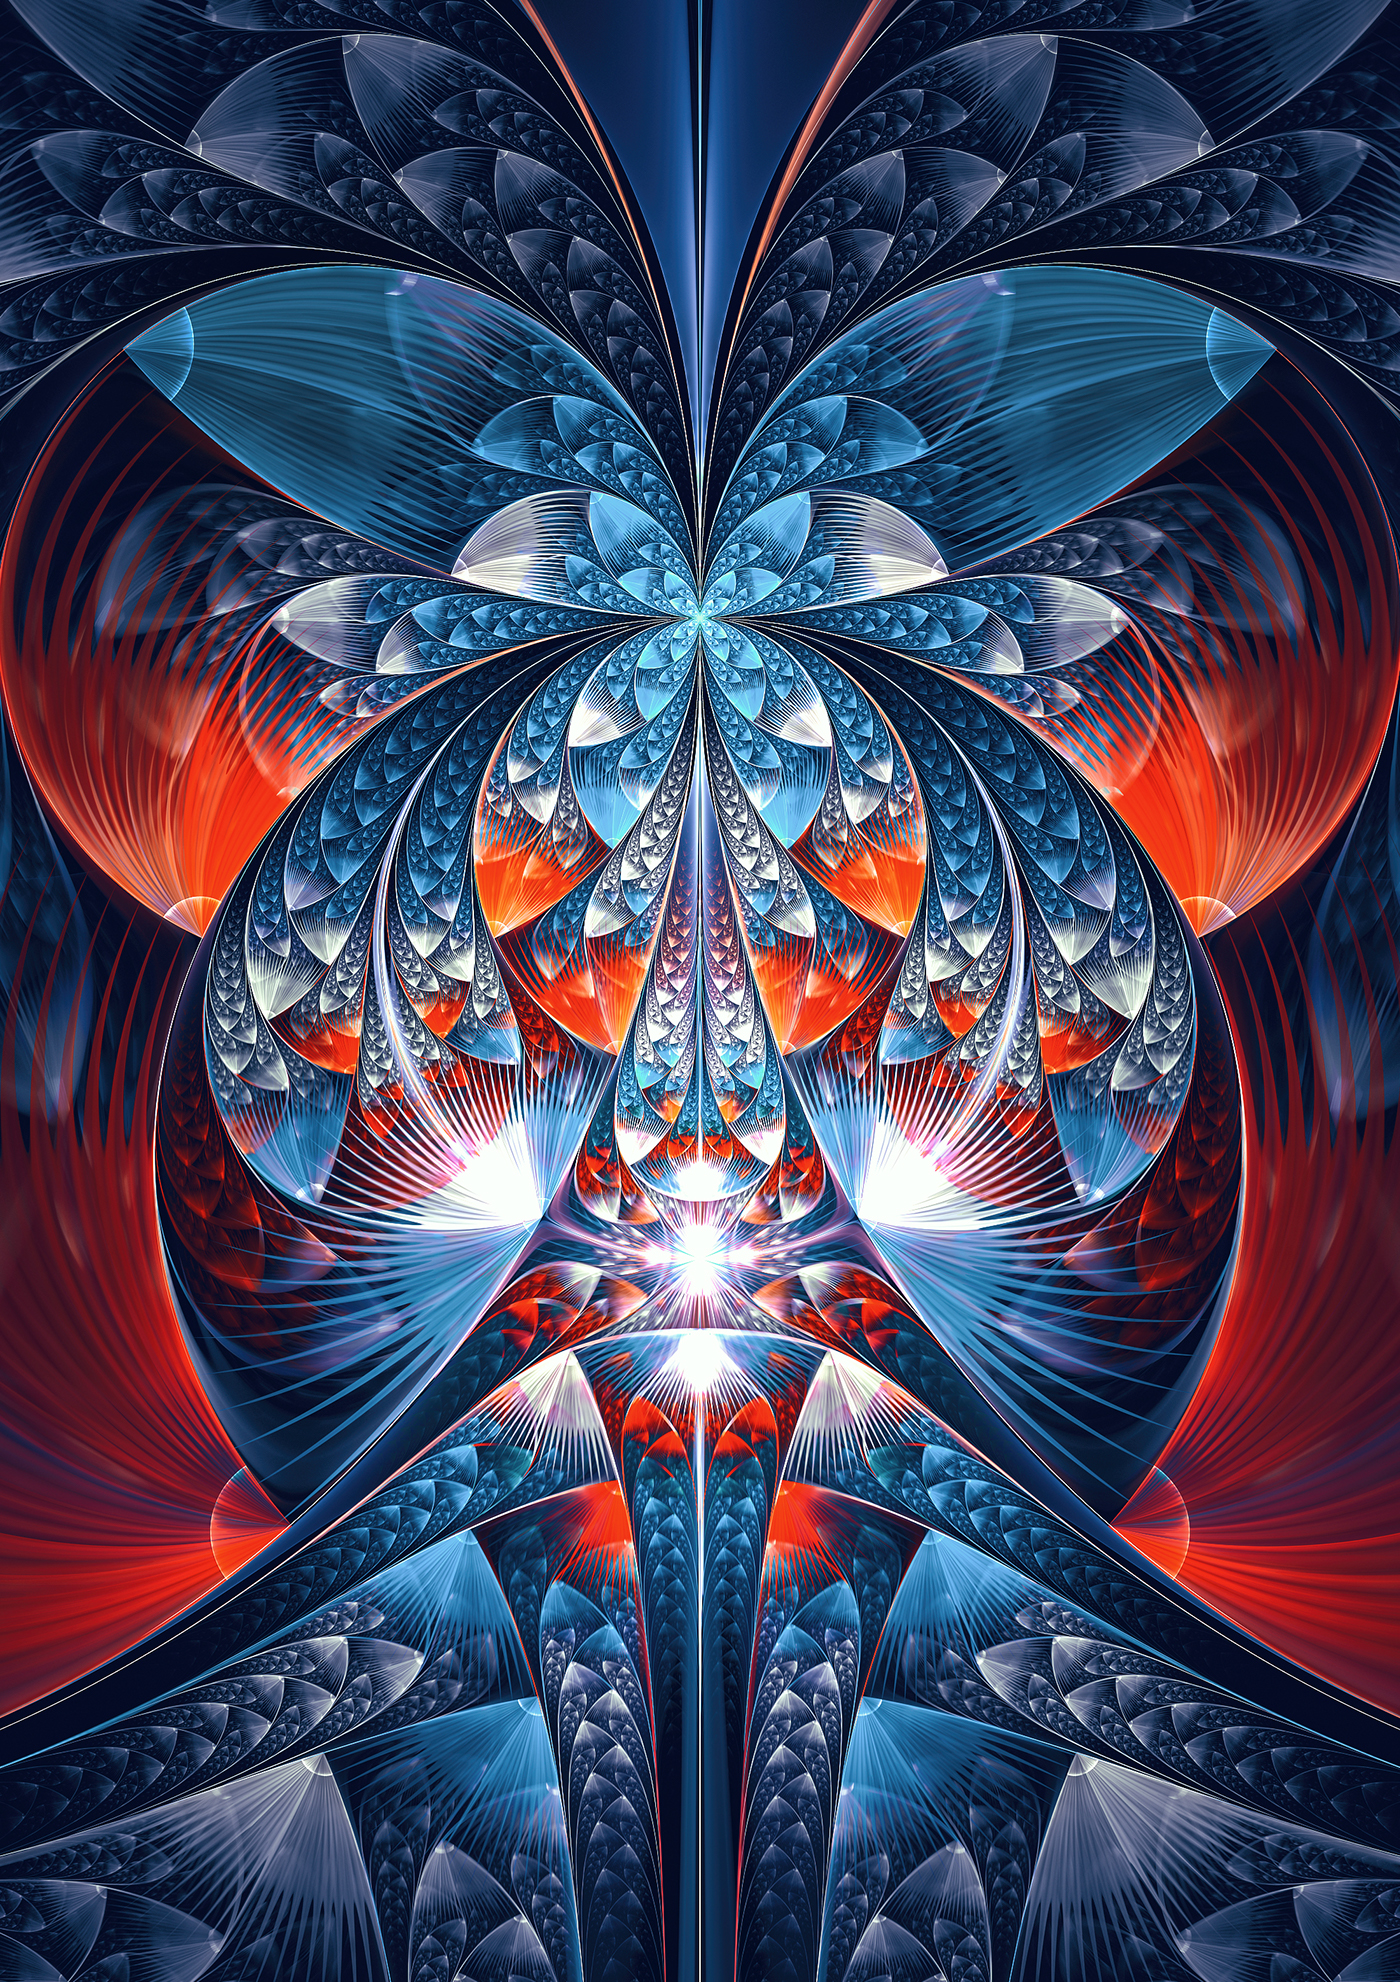 abtract fractal